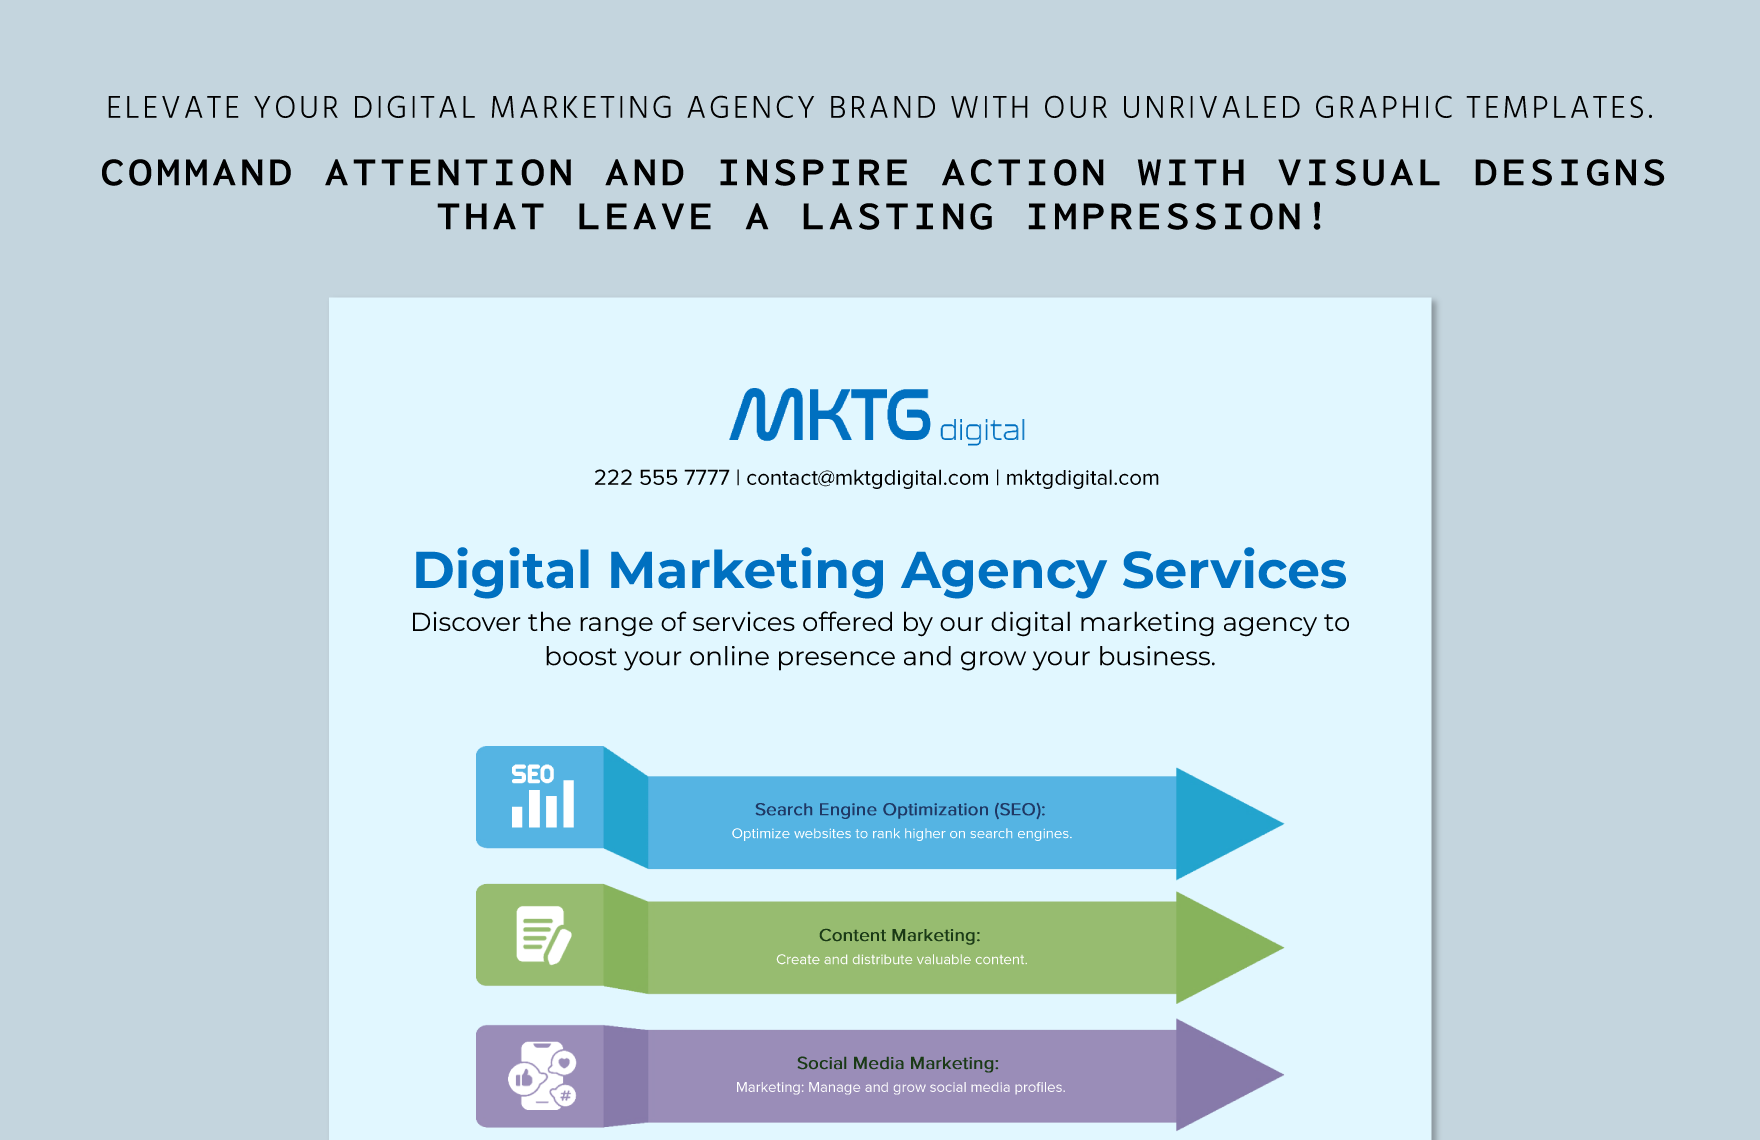 Digital Marketing Agency Service Infographic Template